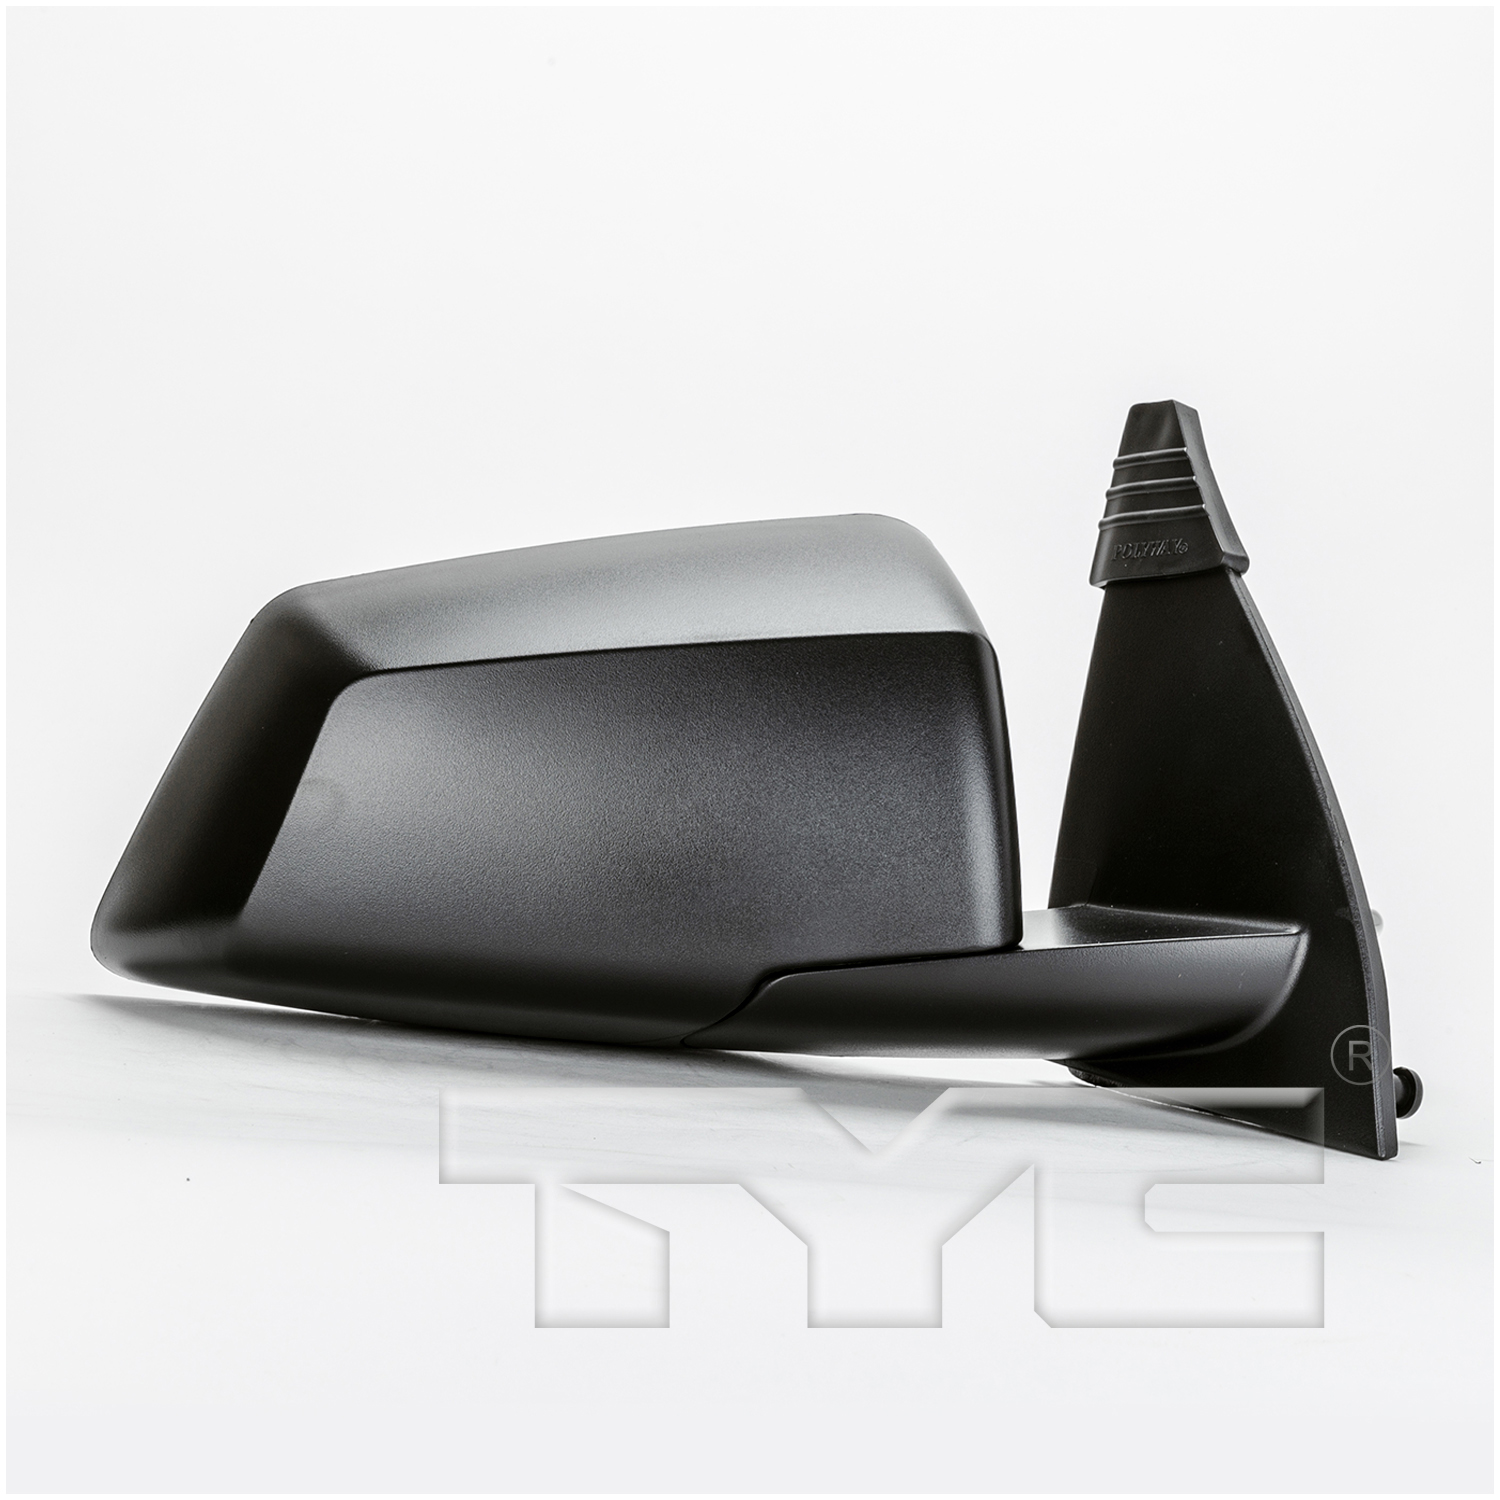 Aftermarket MIRRORS for GMC - ACADIA, ACADIA,09-16,RT Mirror outside rear view